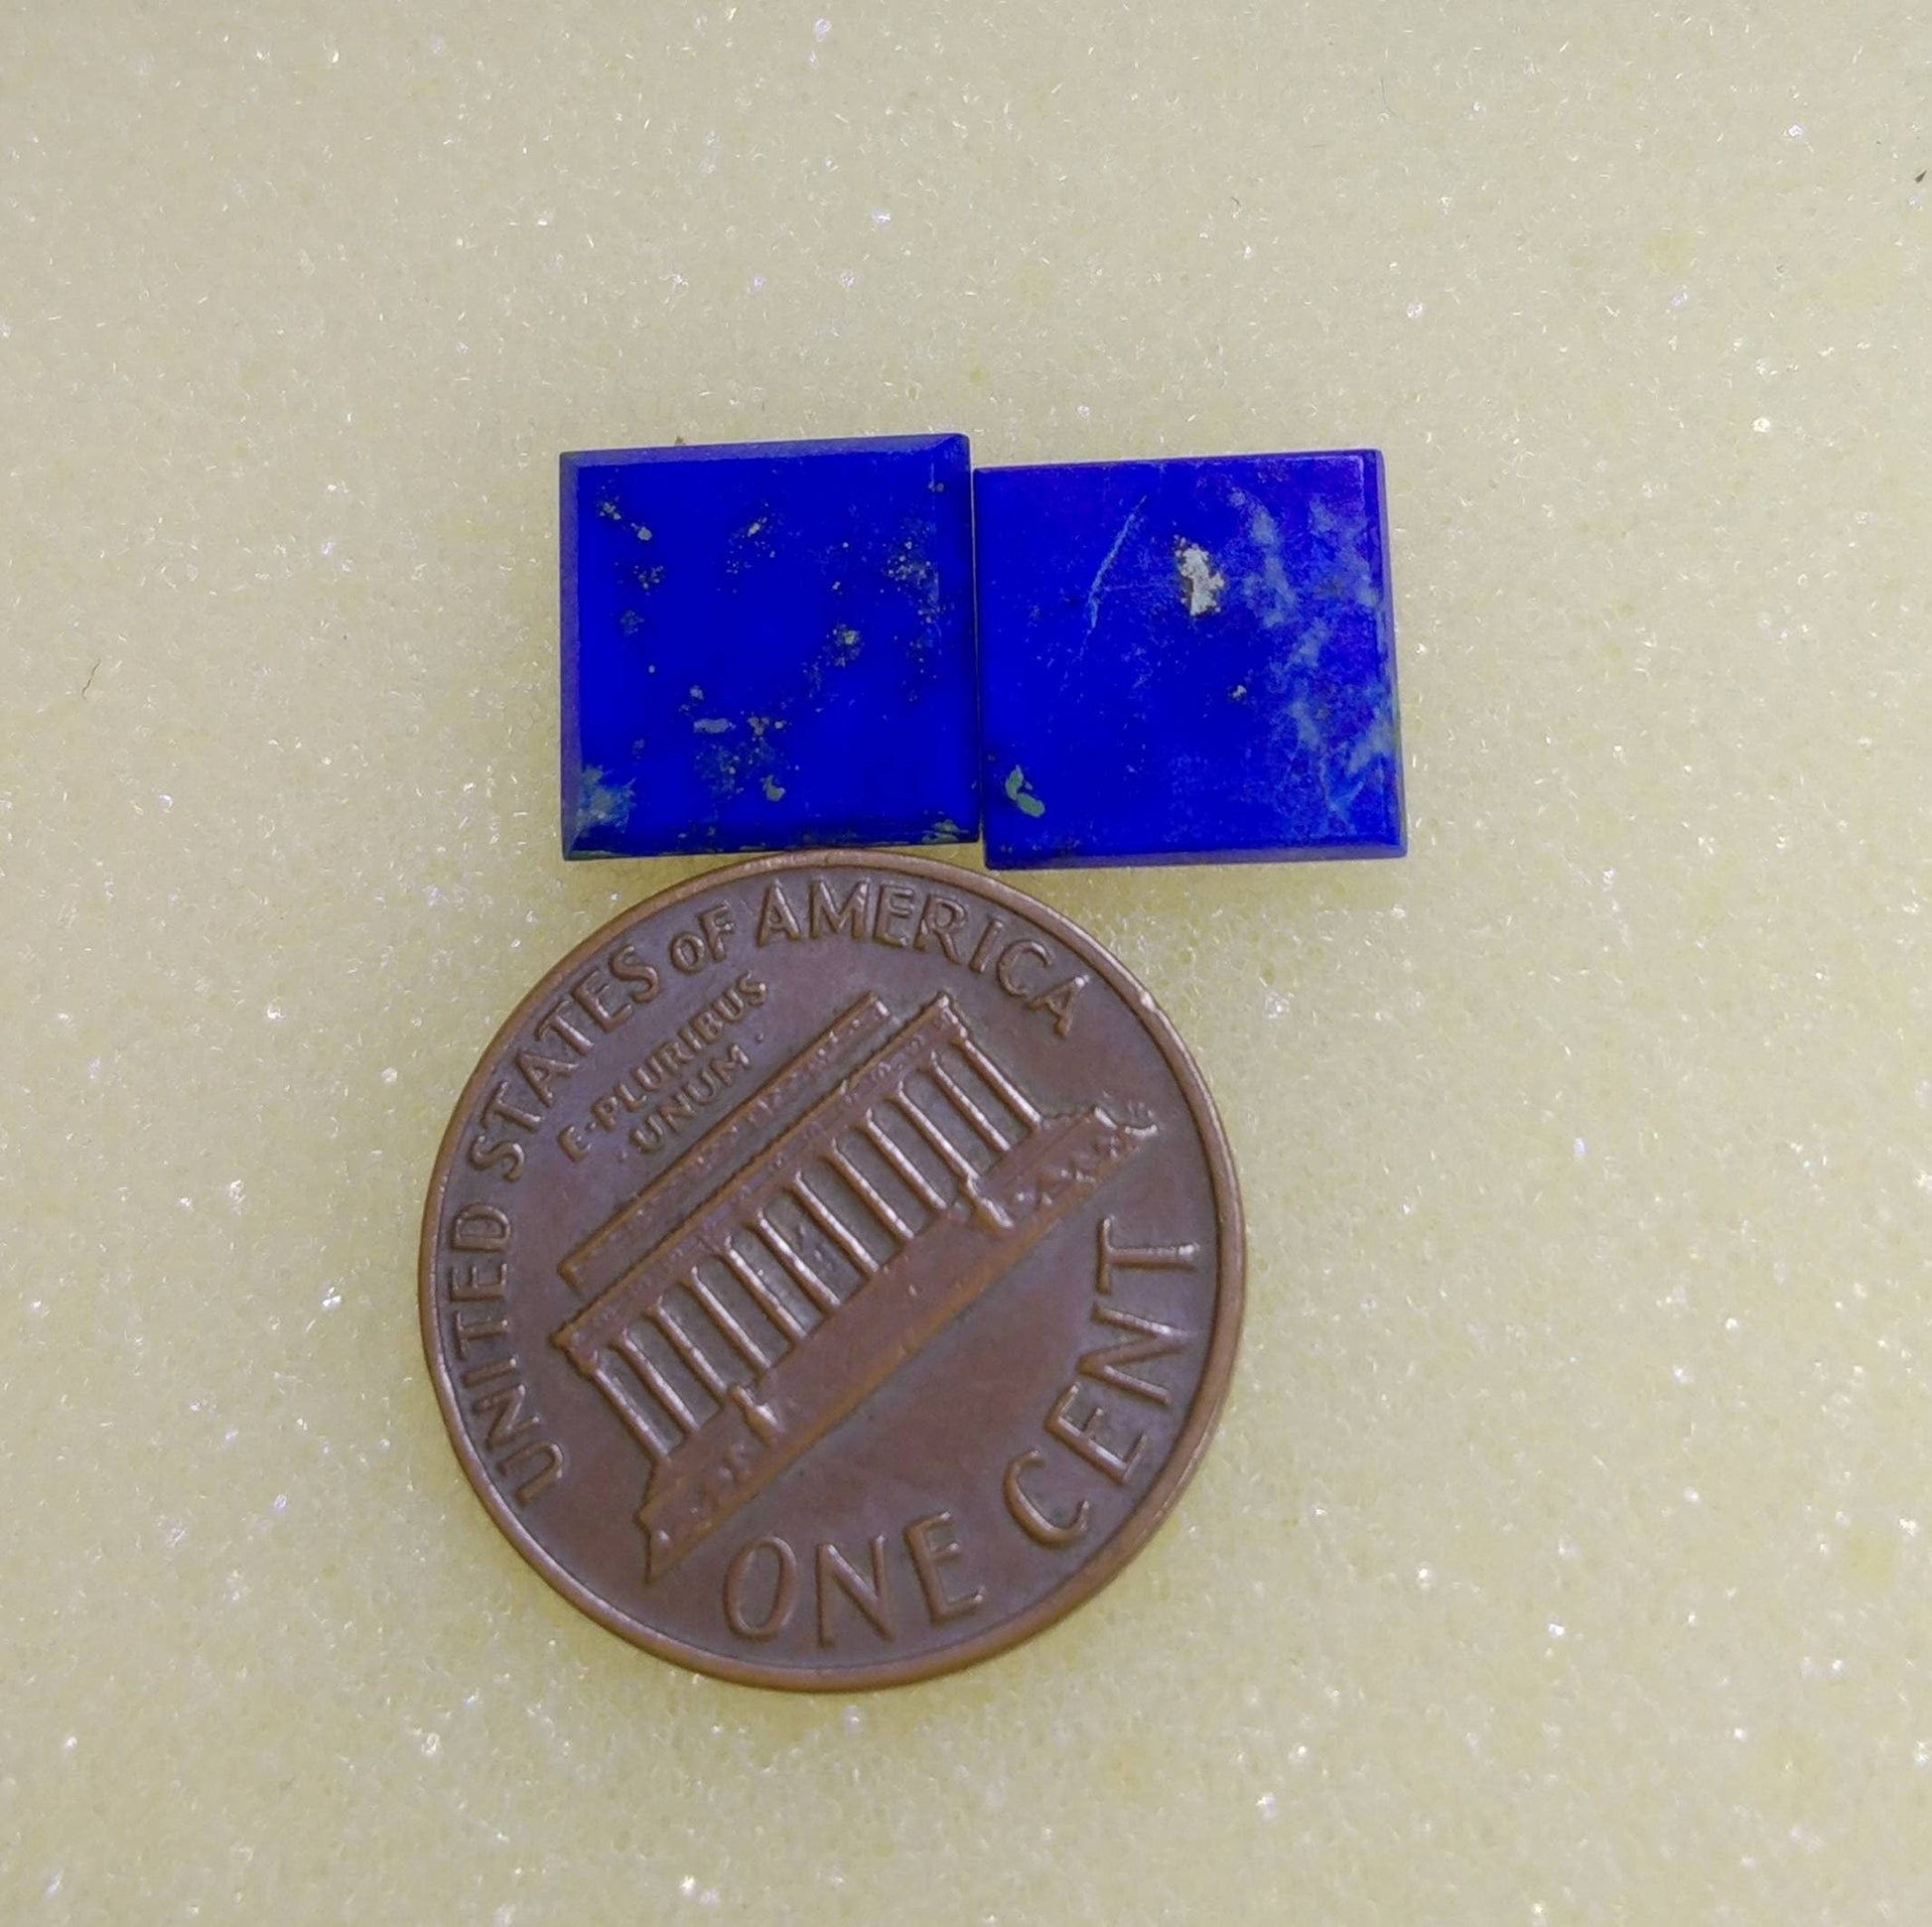 ARSAA GEMS AND MINERALSNatural fine quality beautiful 5.5 carats pair of square shape lapis lazuli cabochons - Premium  from ARSAA GEMS AND MINERALS - Just $12.00! Shop now at ARSAA GEMS AND MINERALS